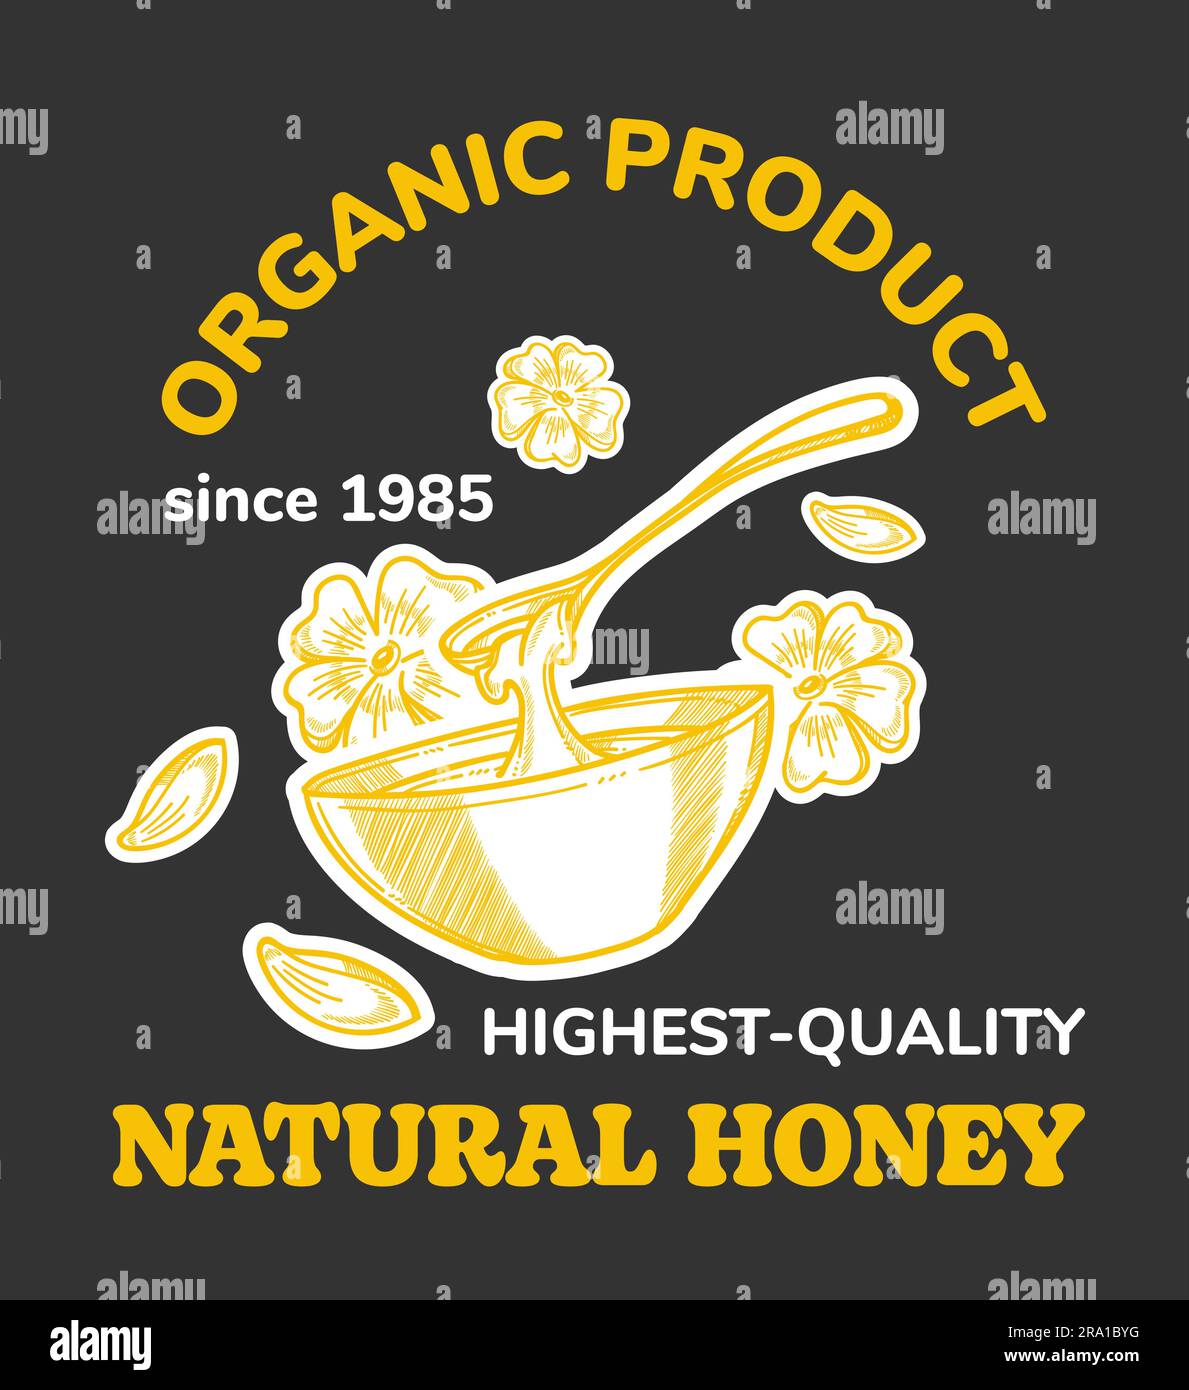 Organic product natural honey, since 1985 quality Stock Vector